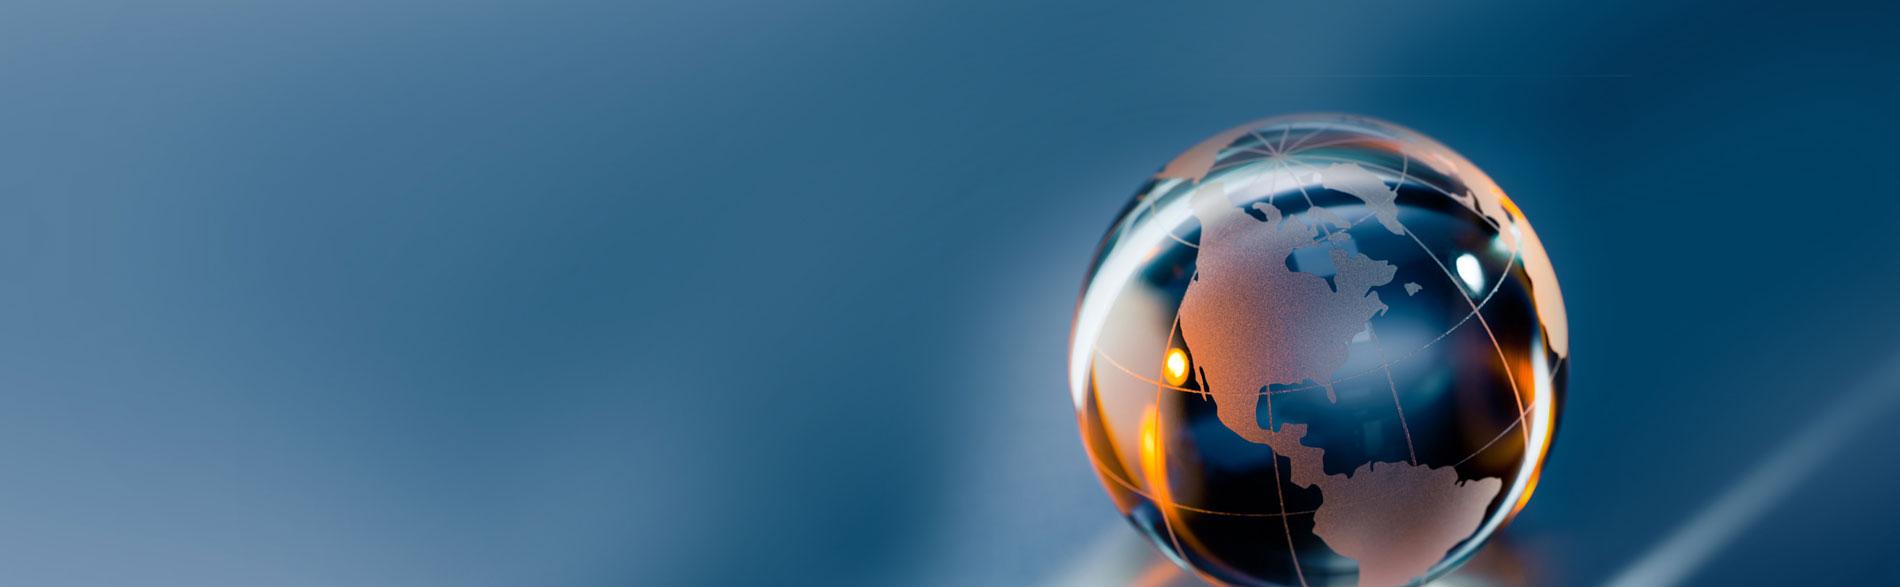 Small glass globe on a blue background